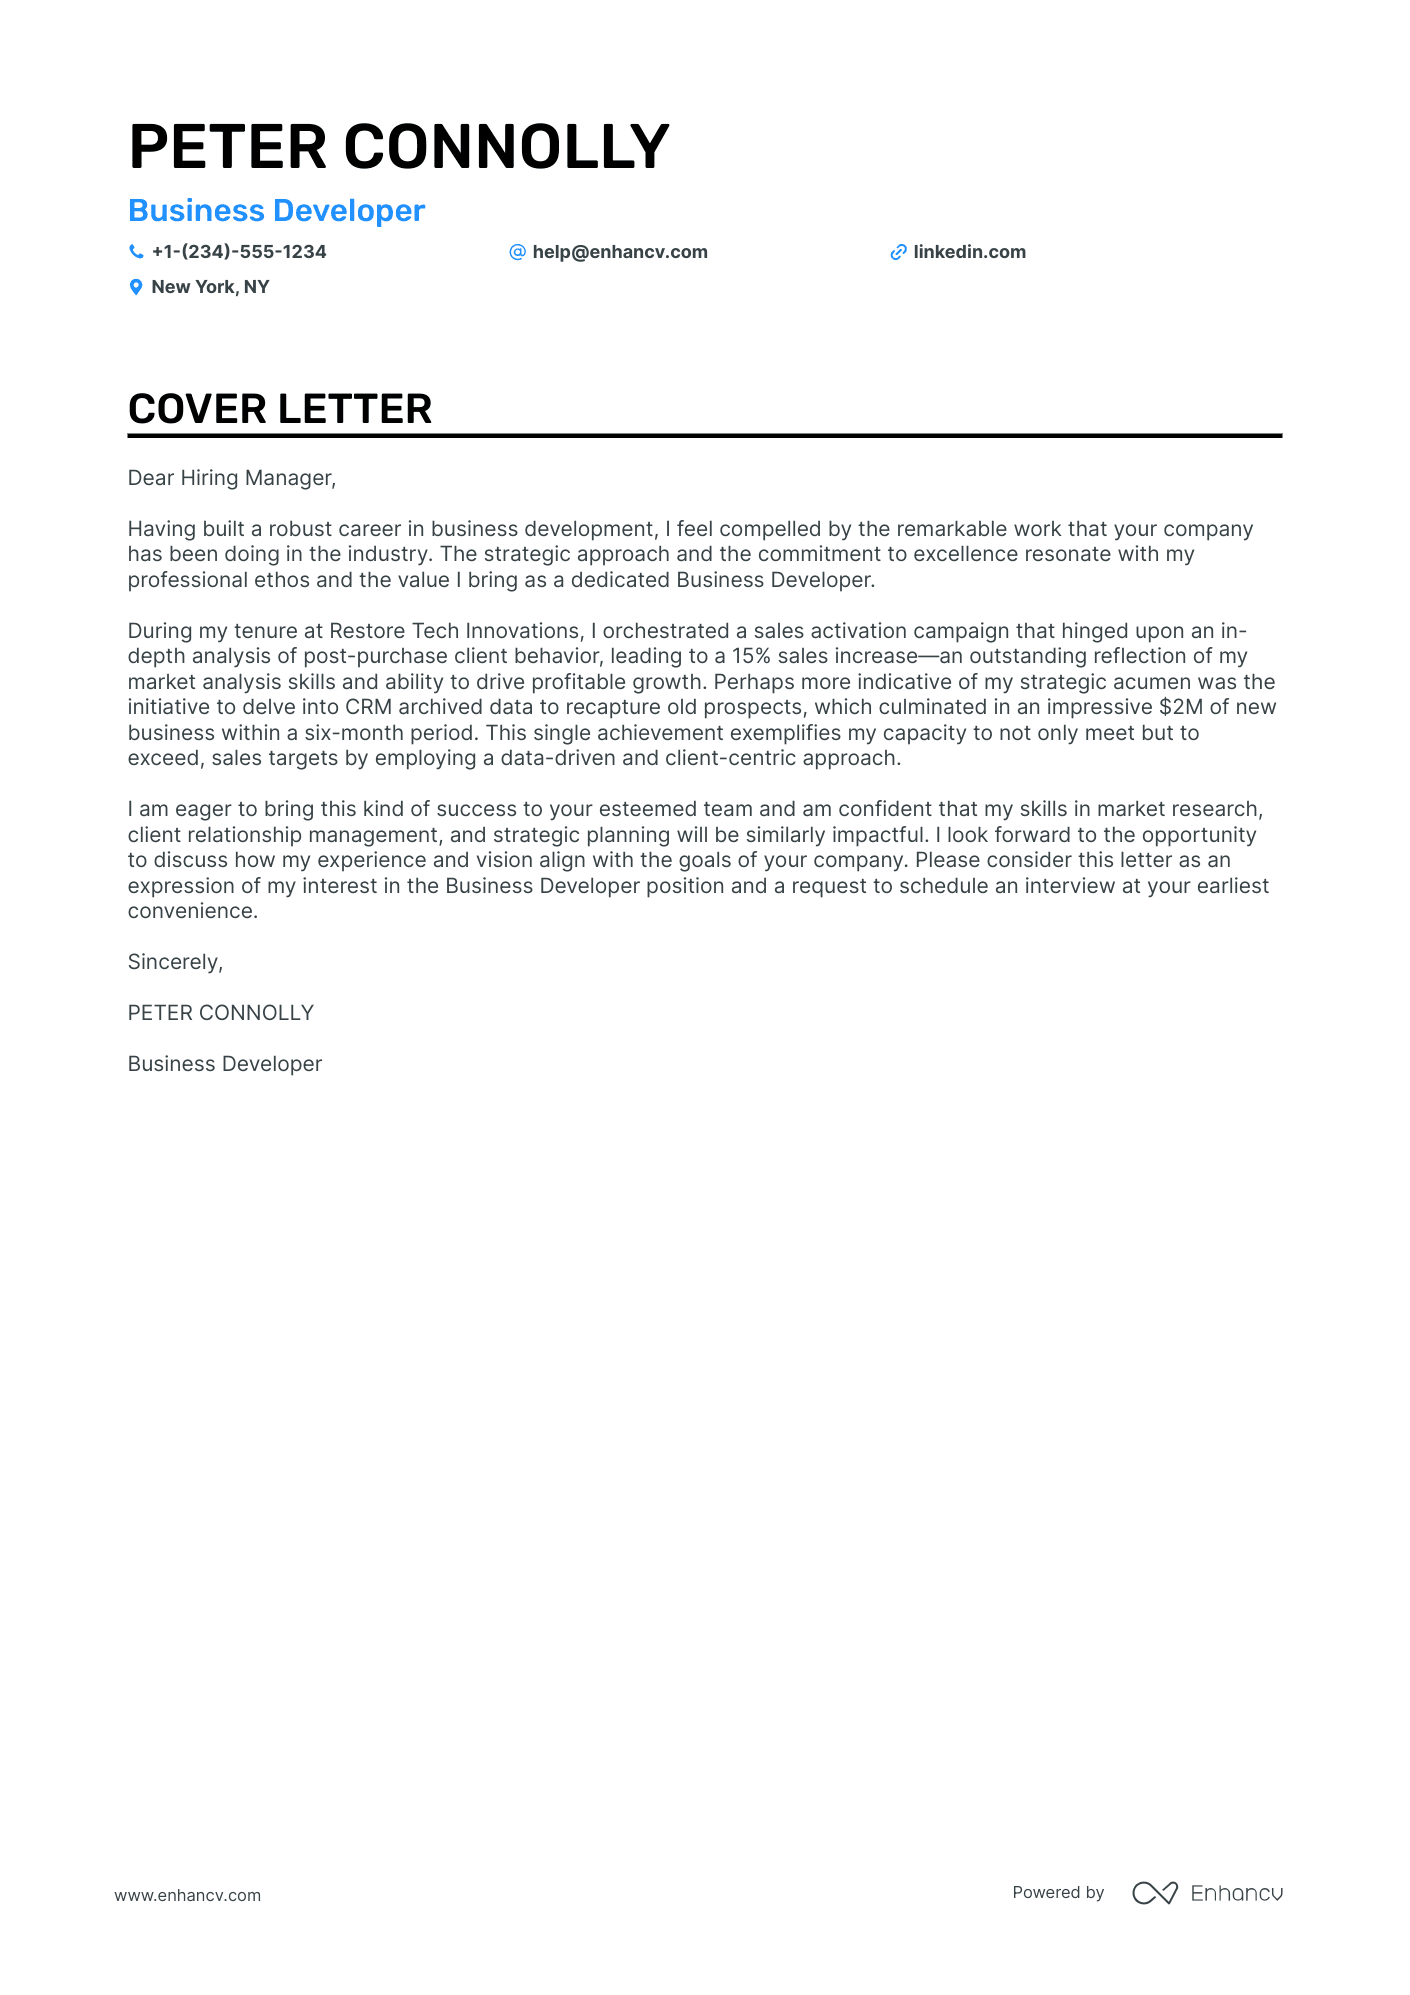 how to write a cover letter for business development jobs